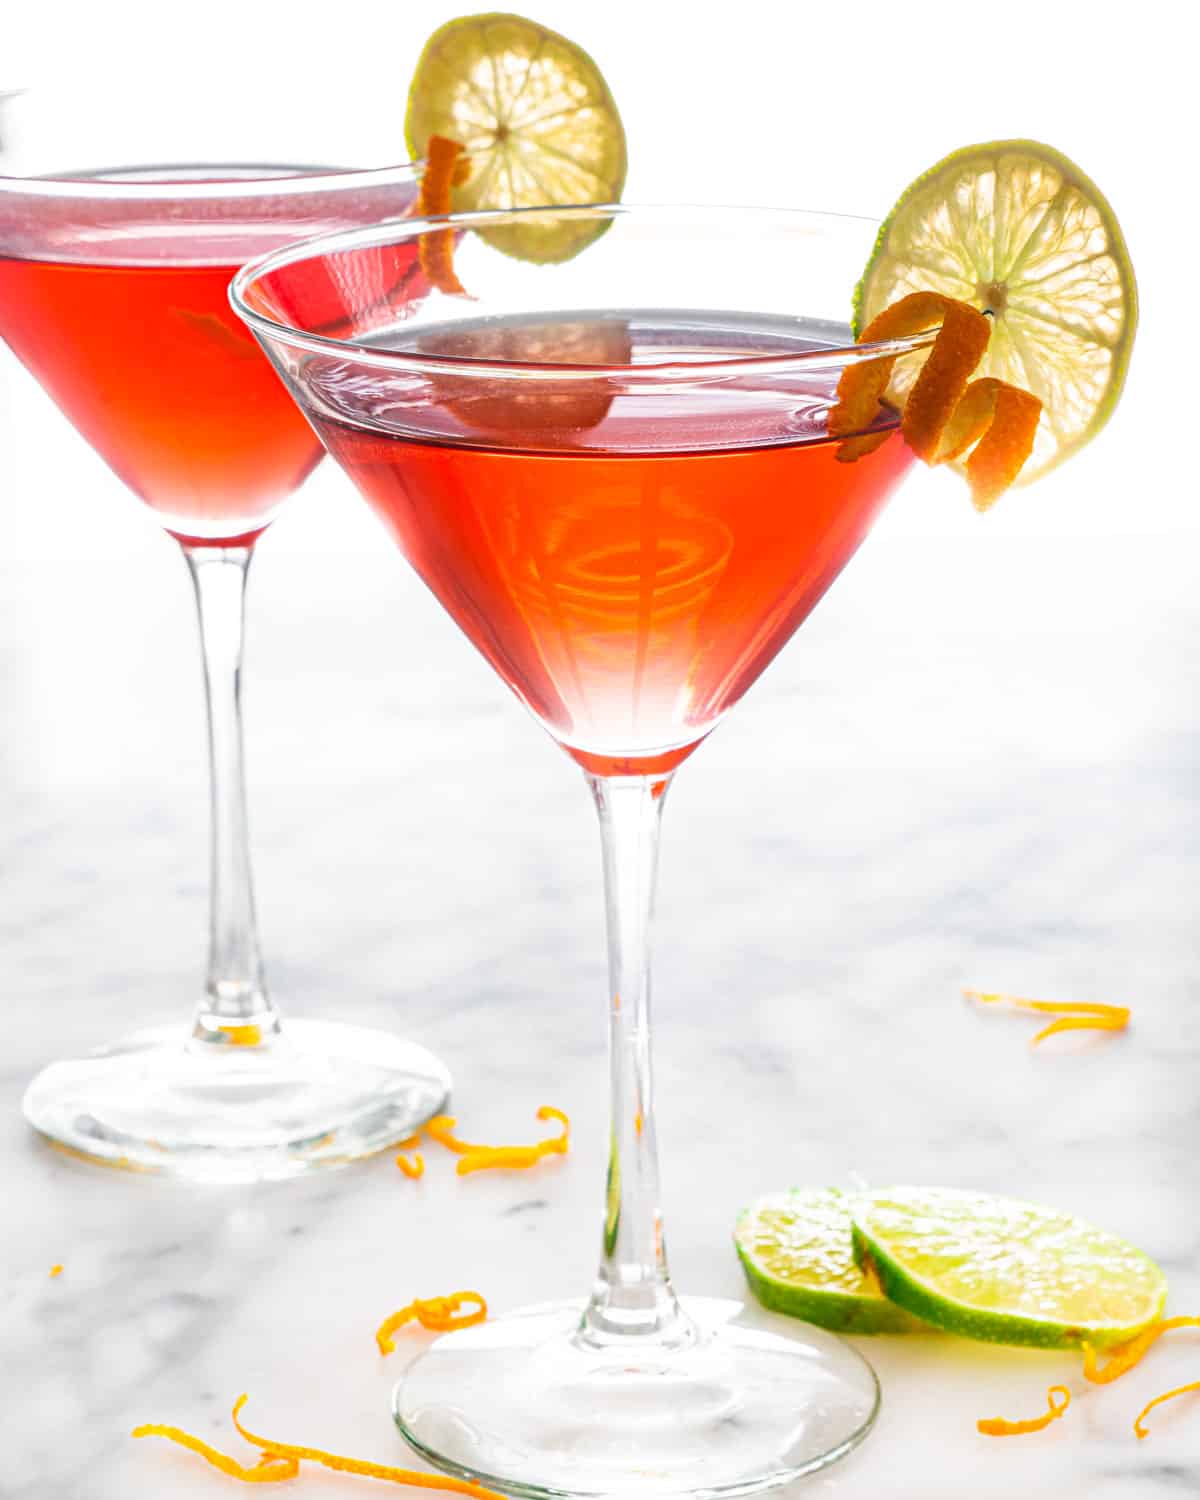 two glasses of cosmopolitan cocktail garnished with orange peel and lime wedge